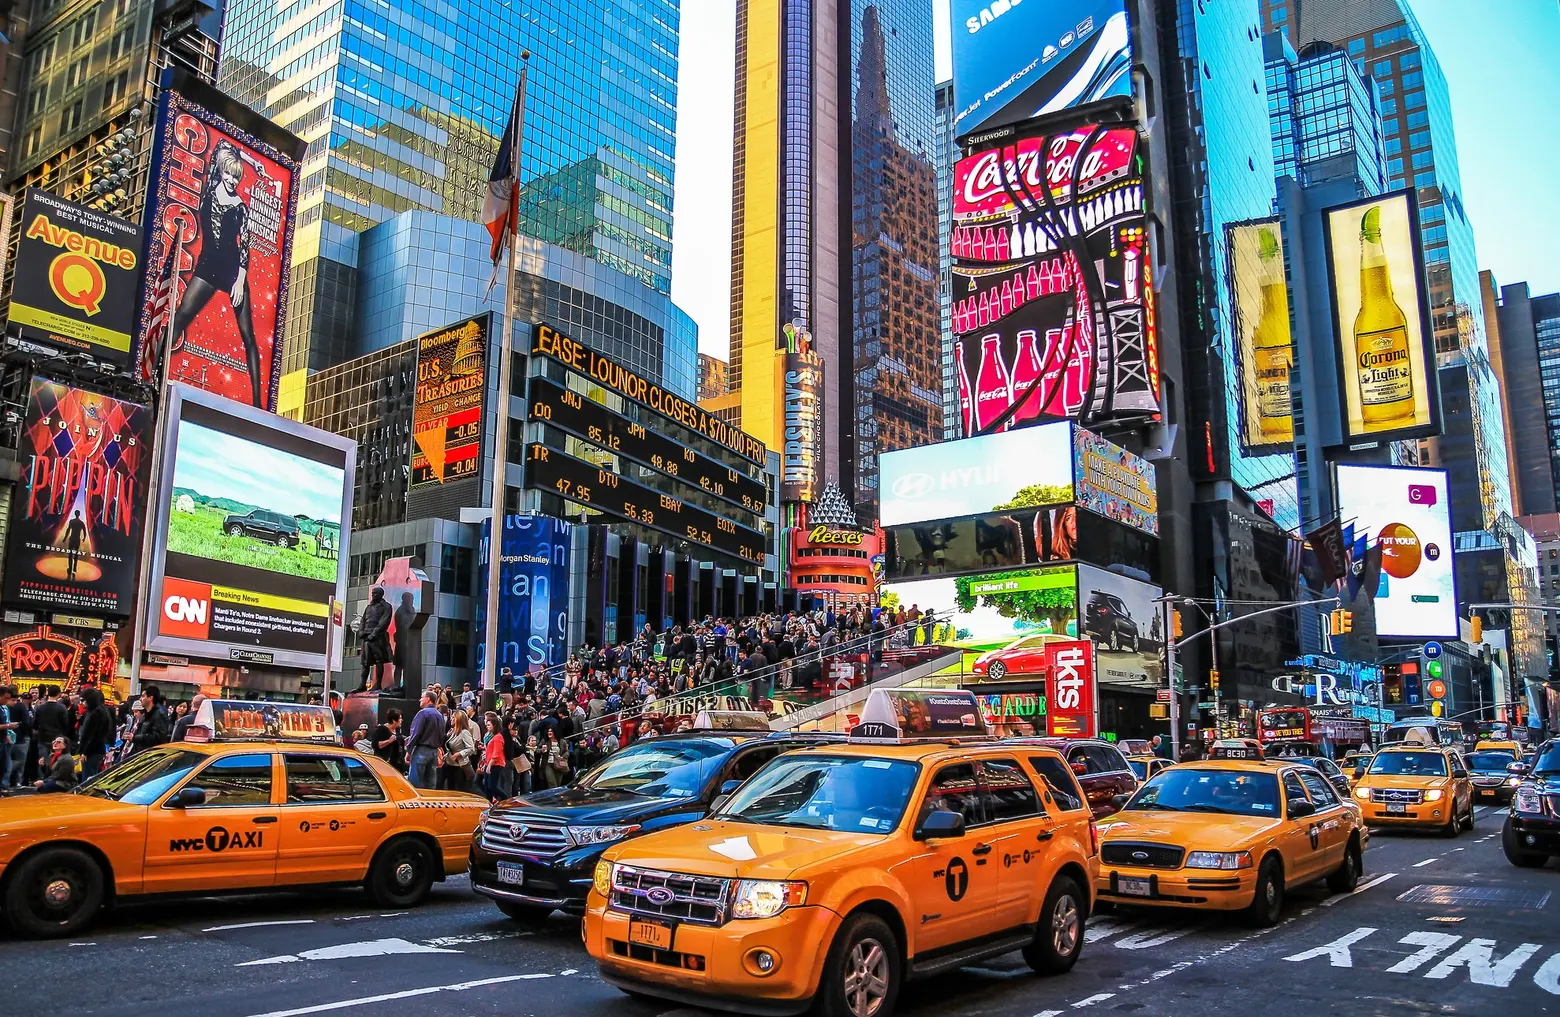 The 8 best places in Times Square that don’t suck